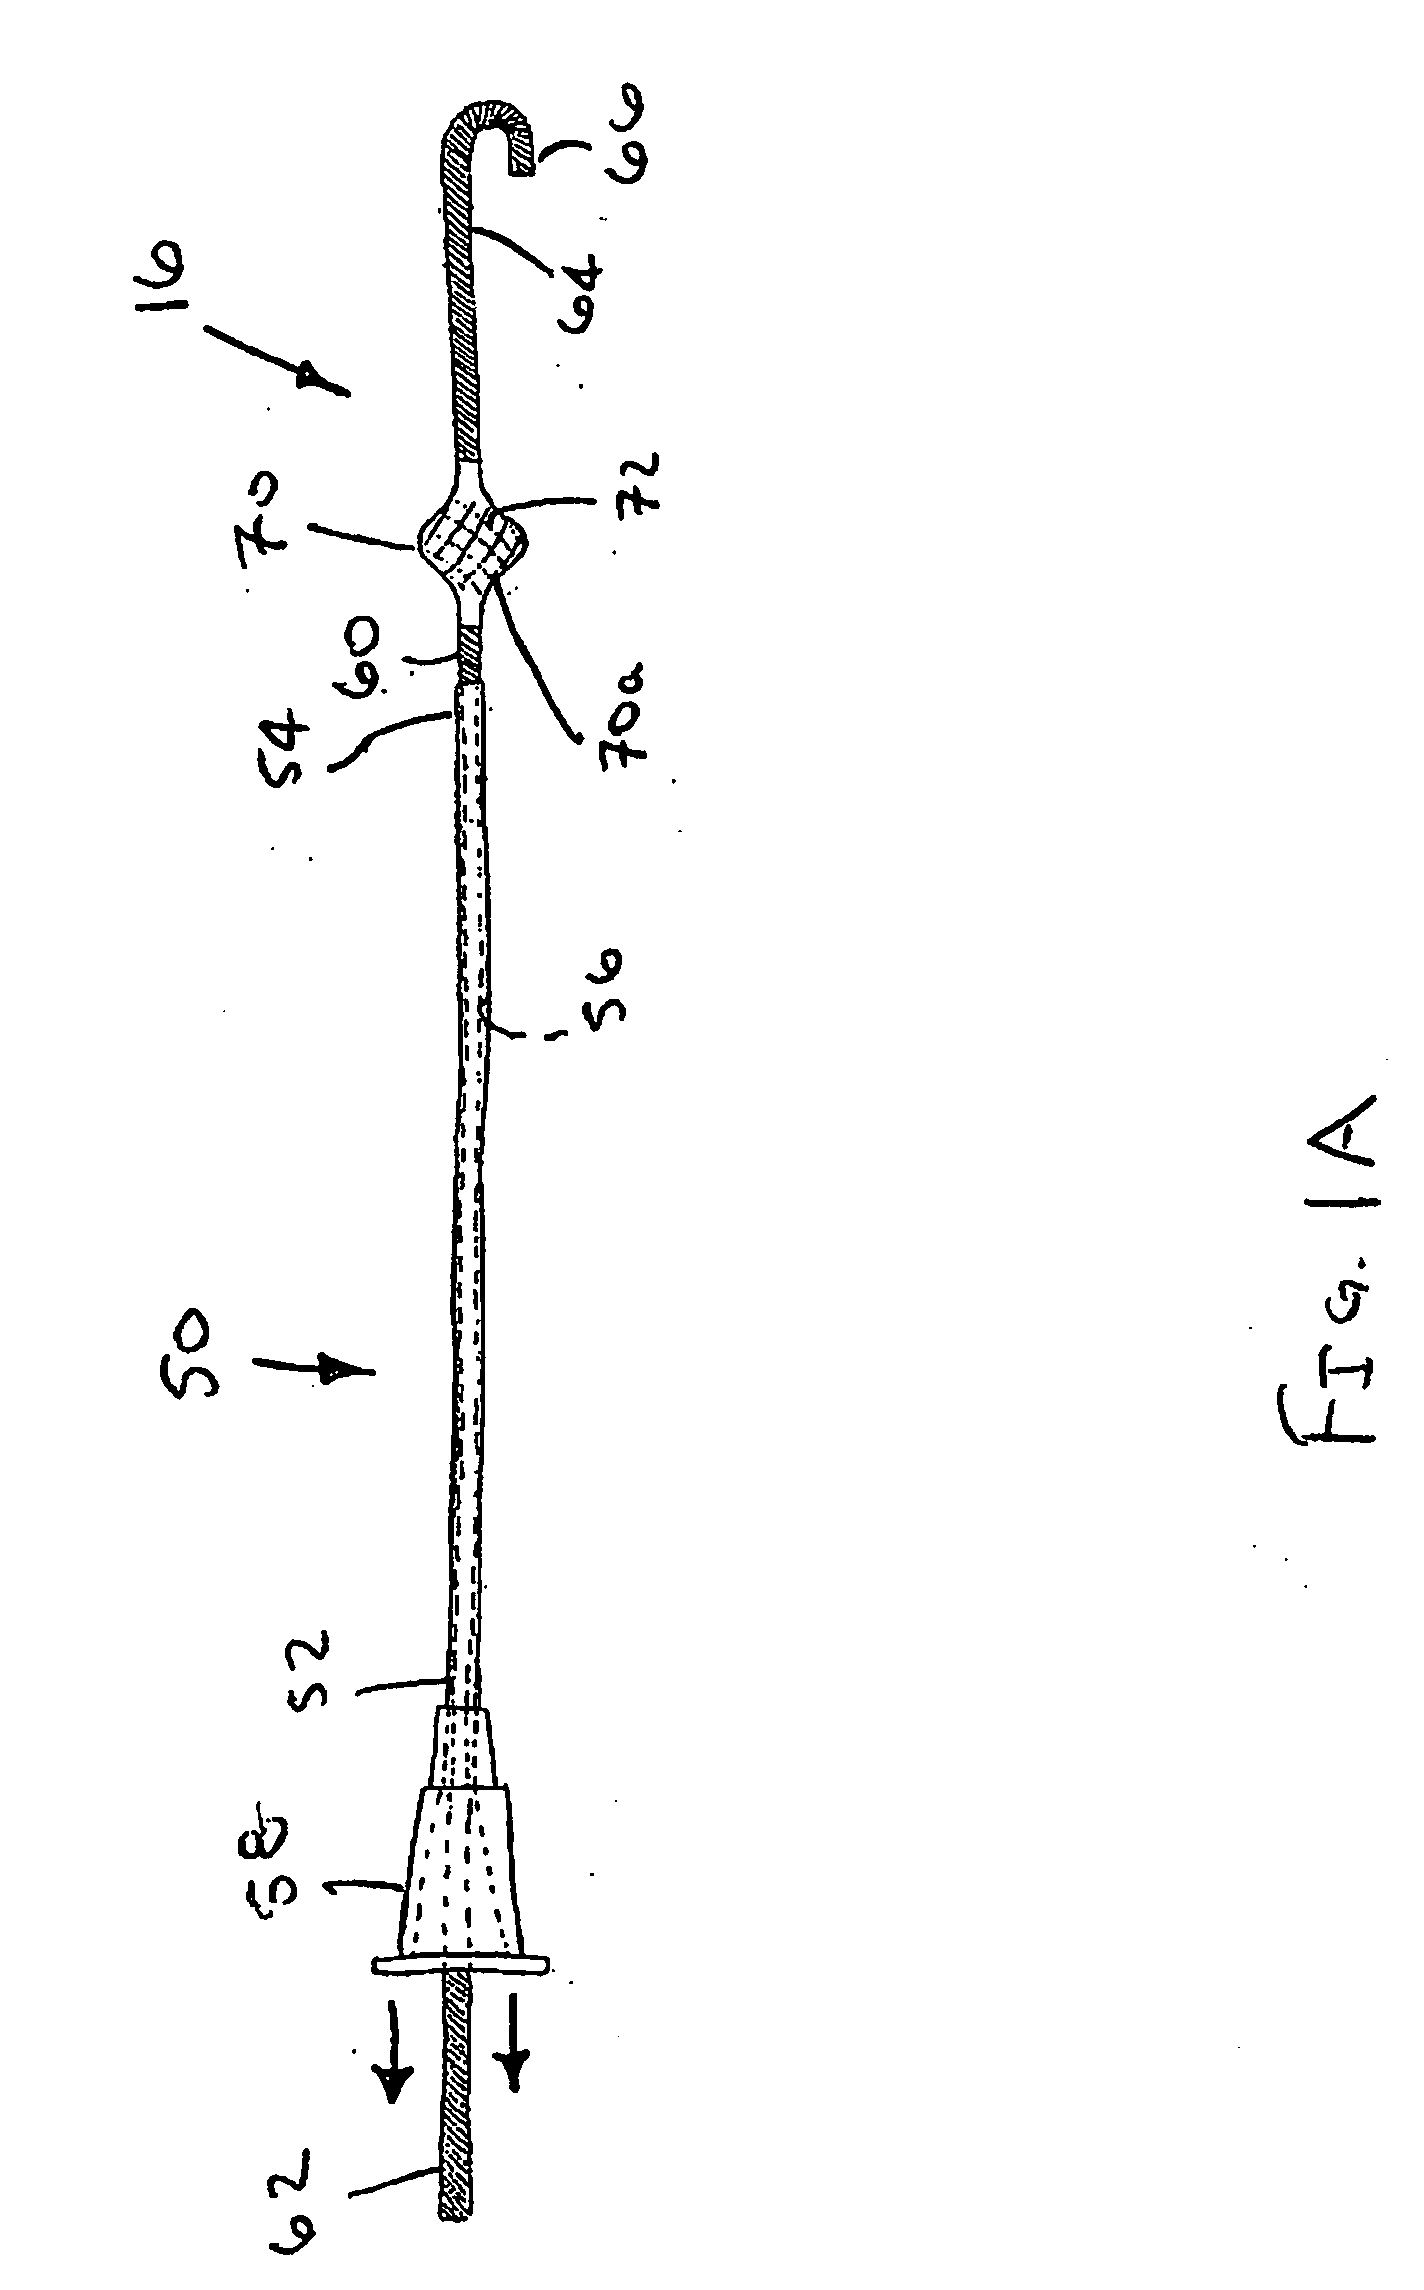 Apparatus and methods for facilitating access through a puncture including sealing compound therein